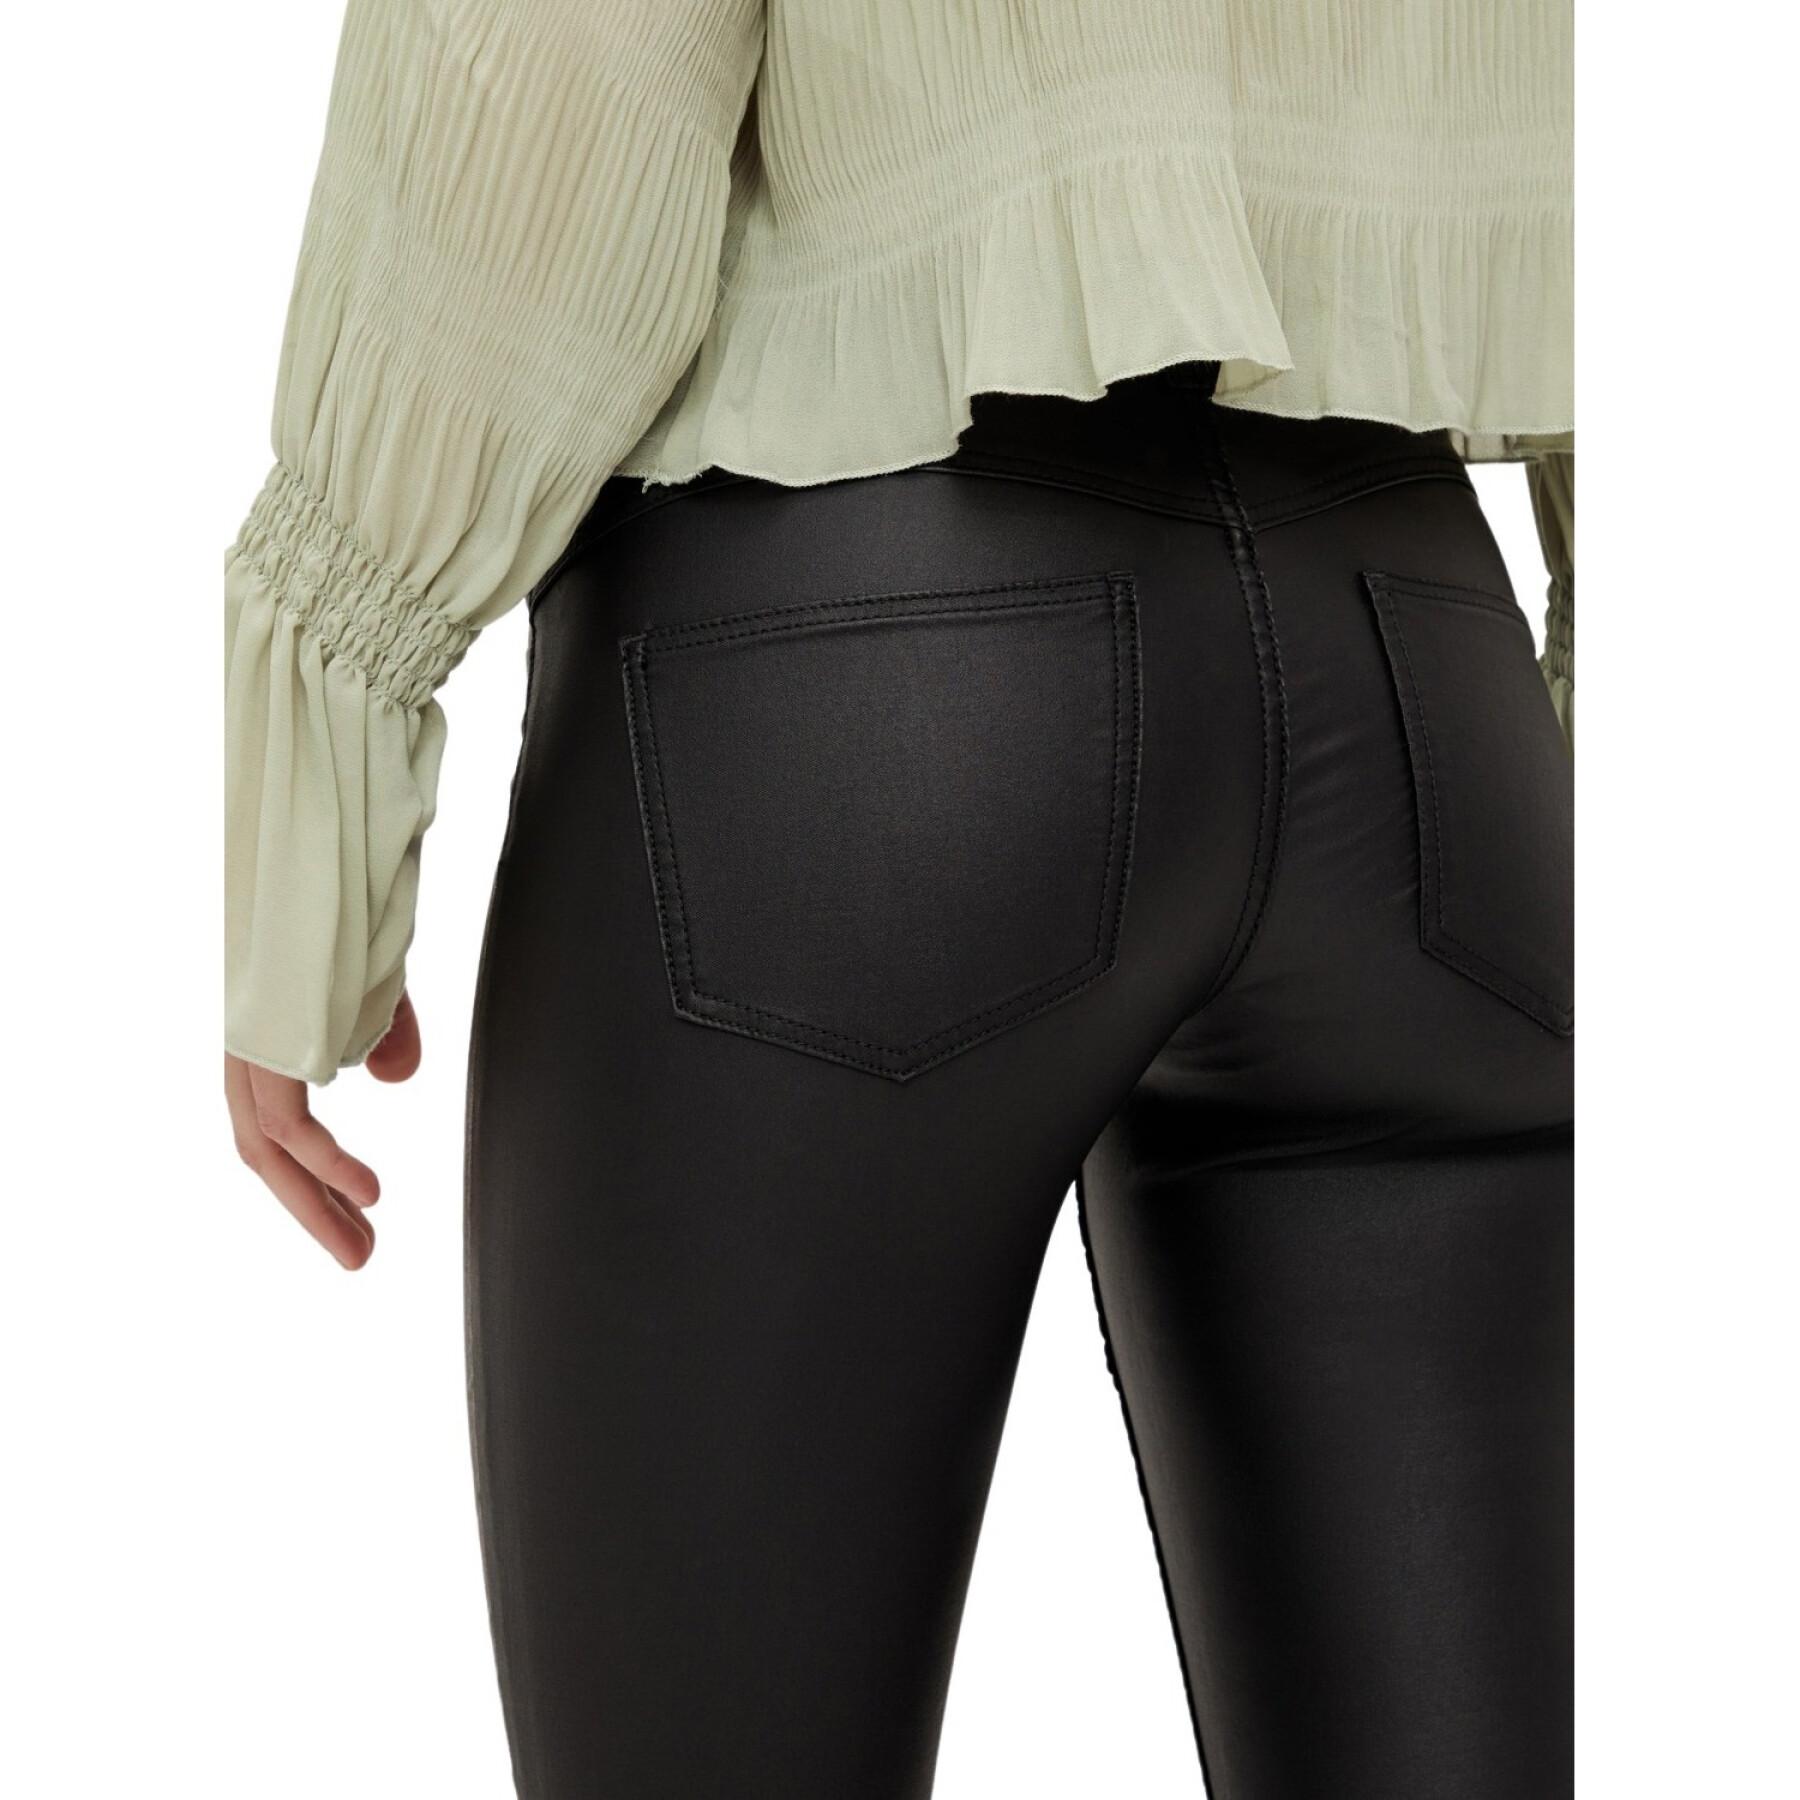 Damskie skinny jeans Pieces Share-up Paro Coated